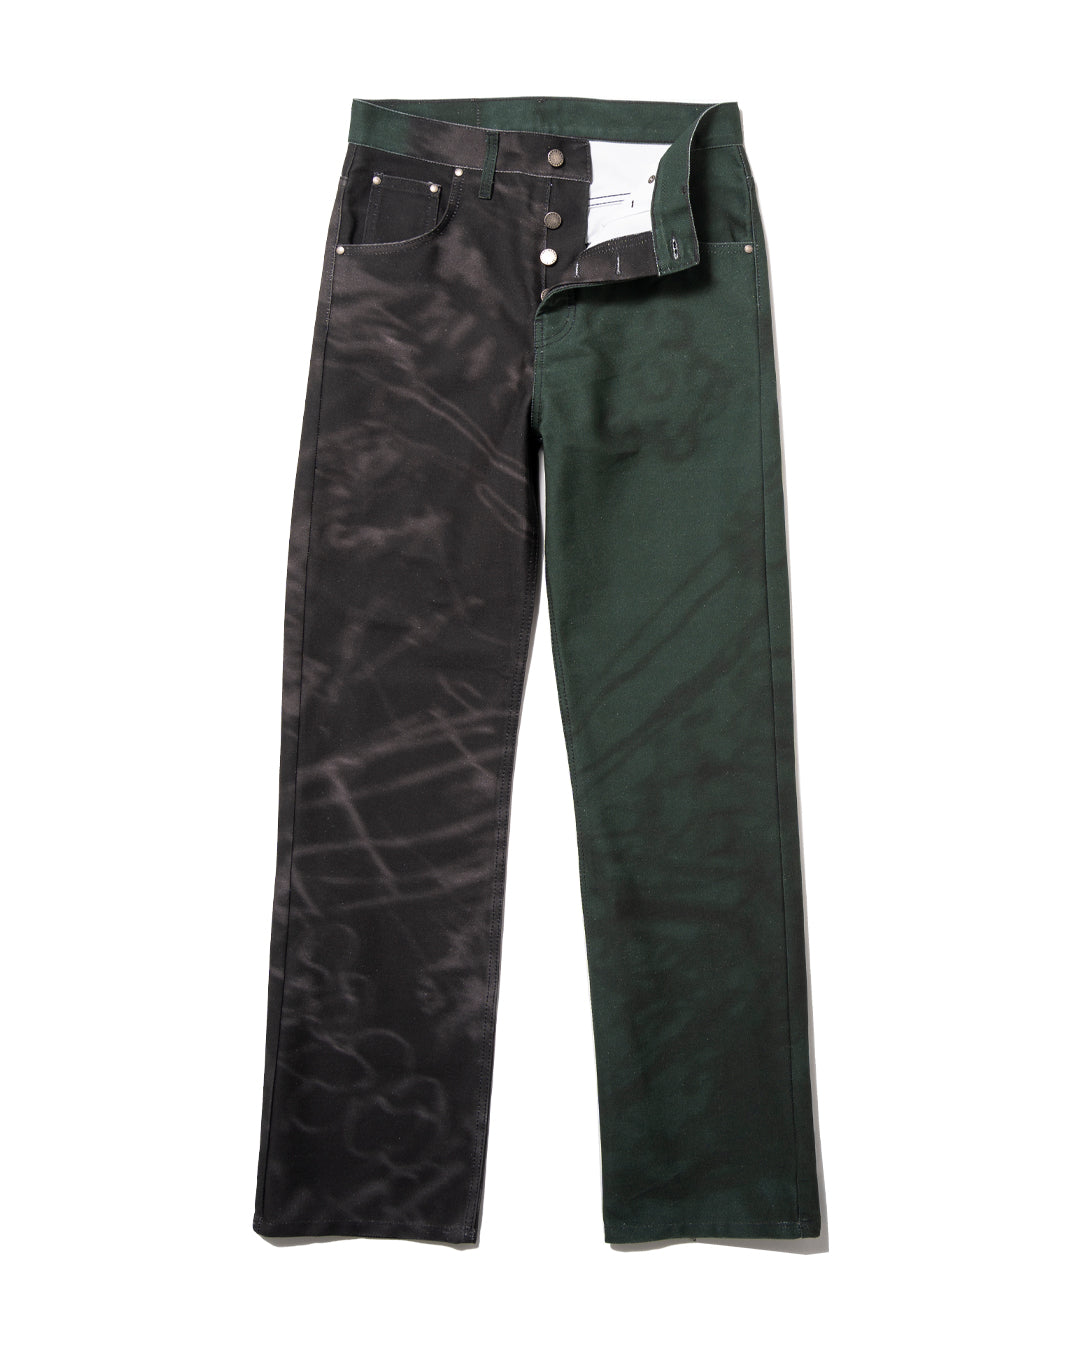 GREEN AND BLACK SPLIT DRAWINGS JEANS